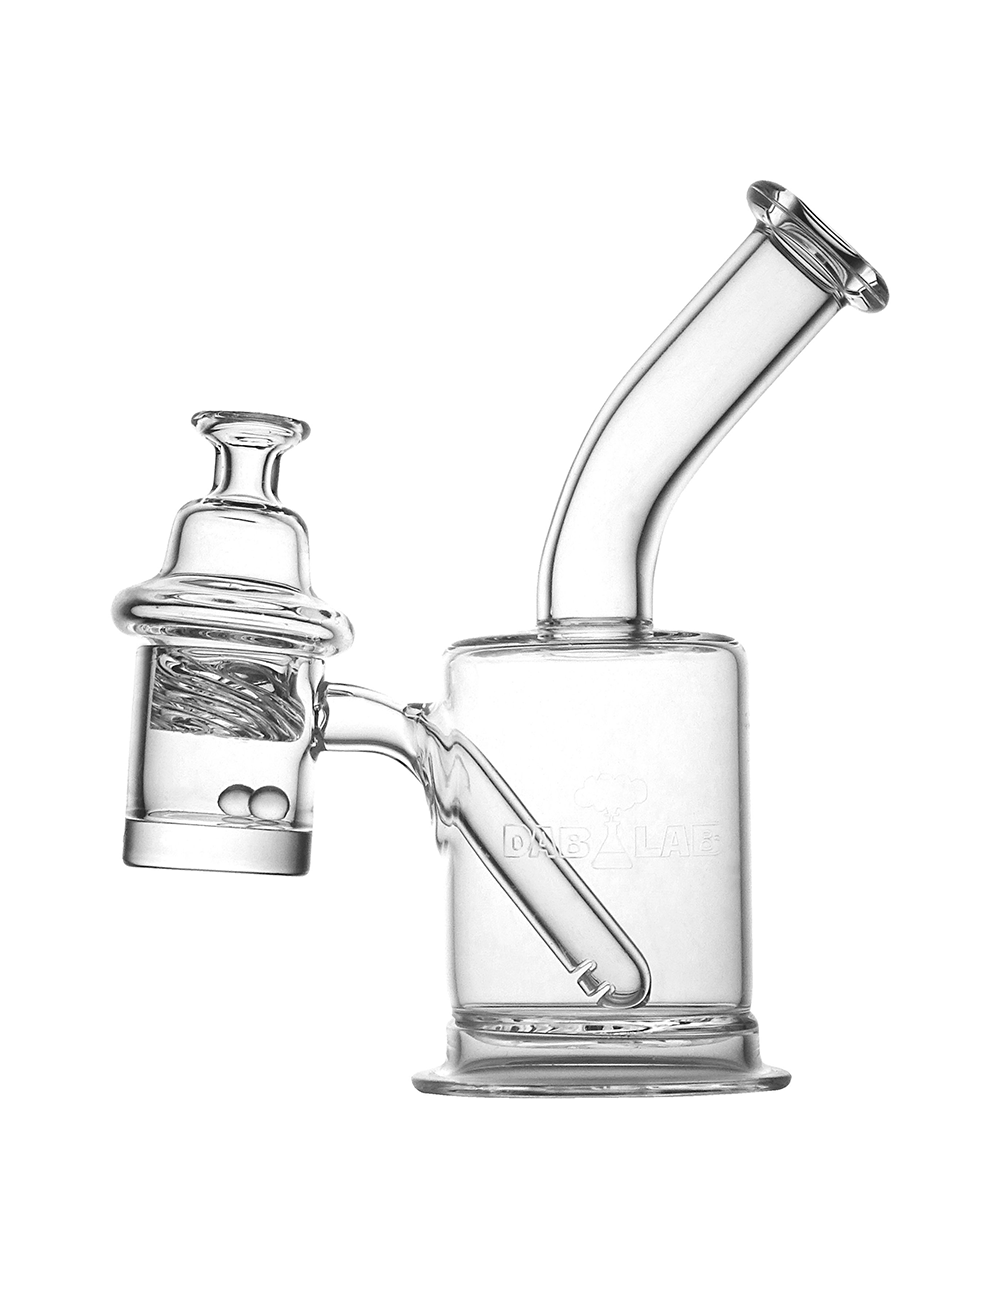 STRONG BONG Glass Dab Rig Bong 8 with Quartz Banger 18.8mm and Carb Cap, Size: 8 (20cm), Smoking Waterpipe